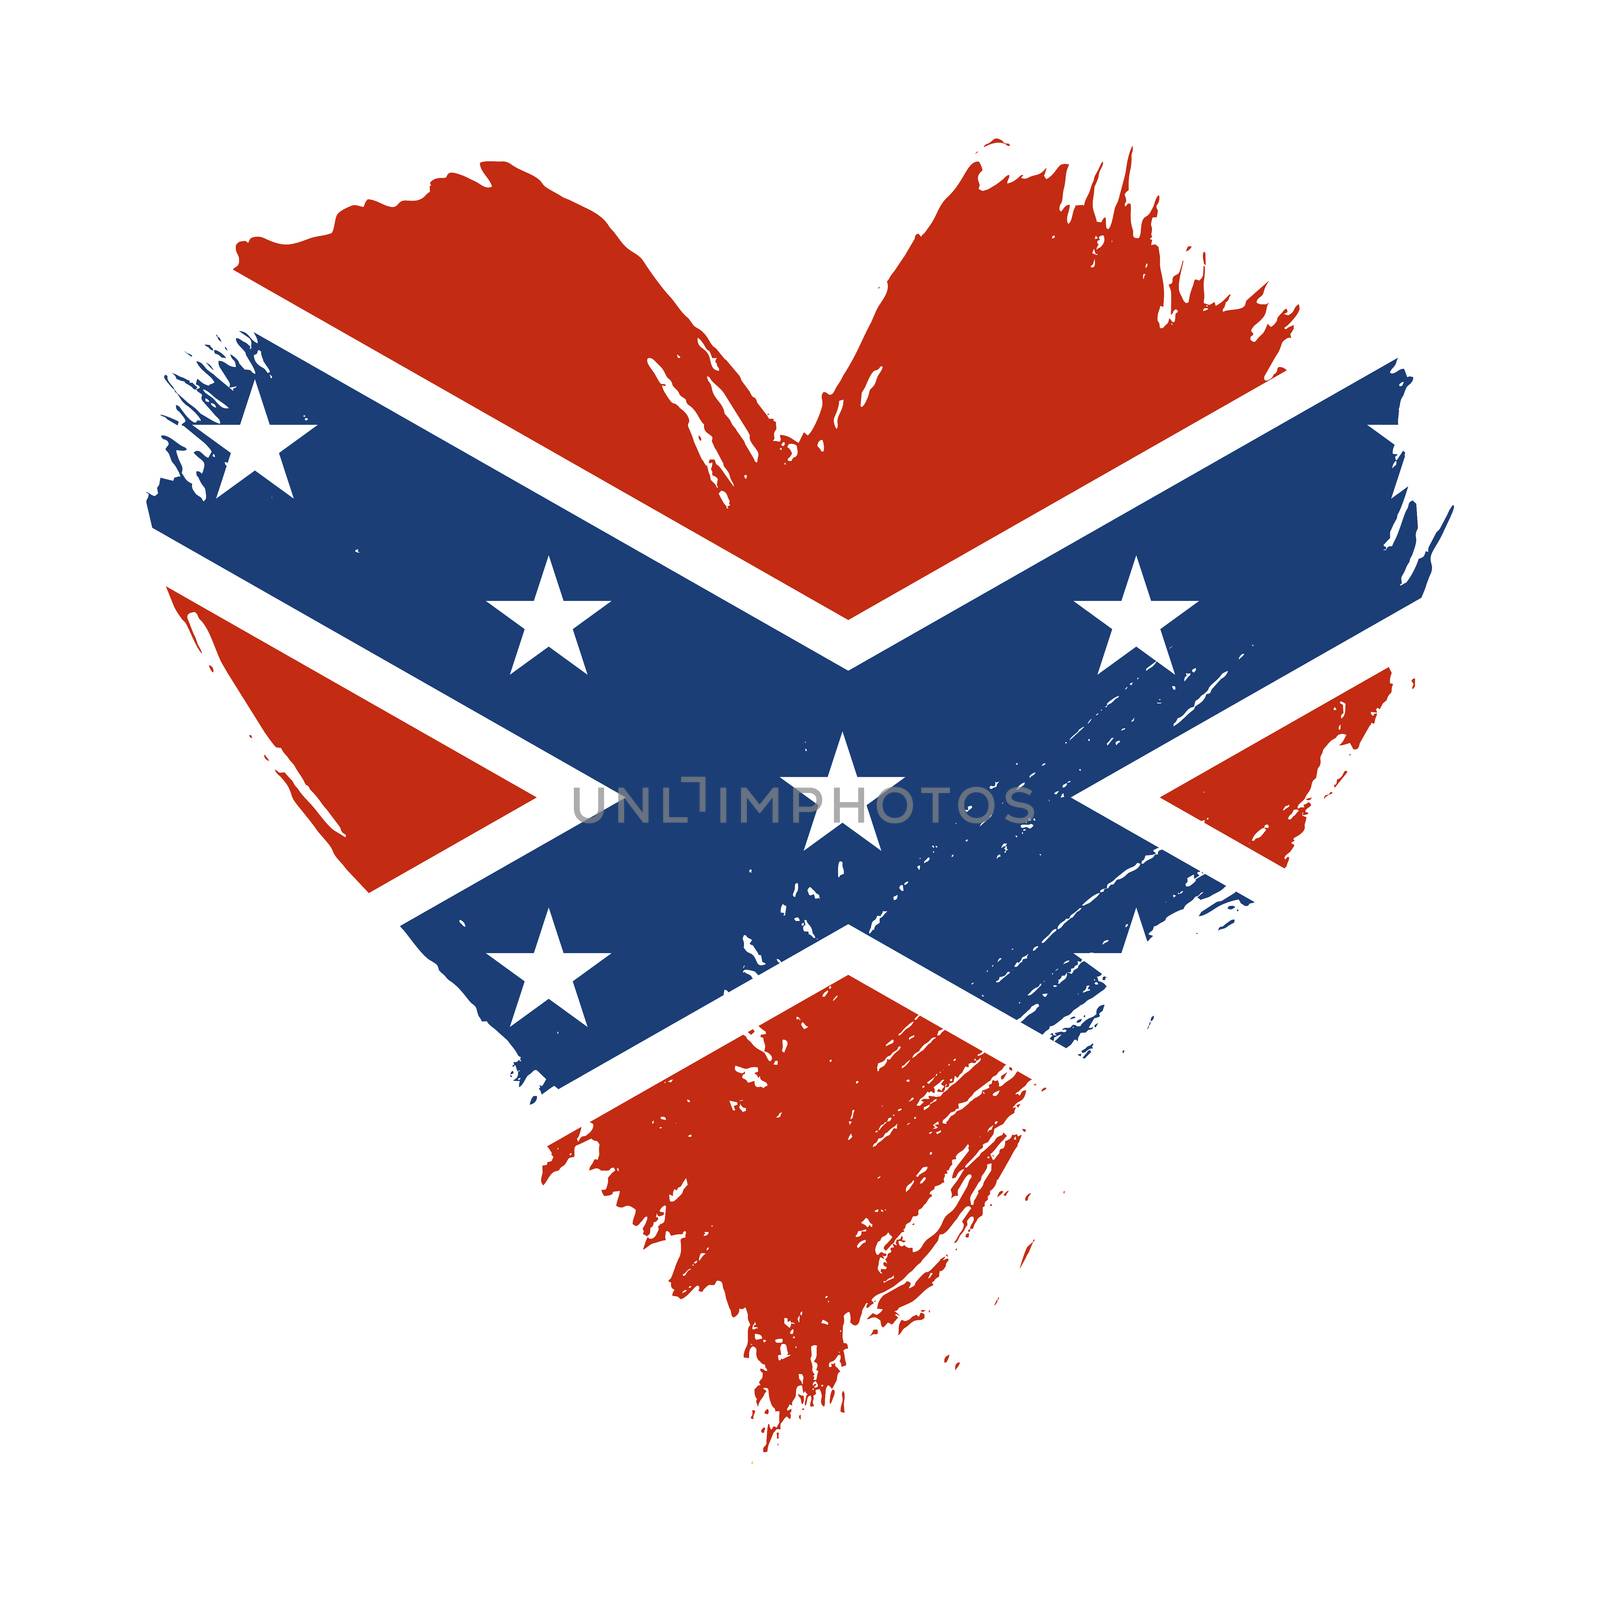 Grunge brushstroke painted illustration of heart shaped distressed American US Confederate flag isolated on white background